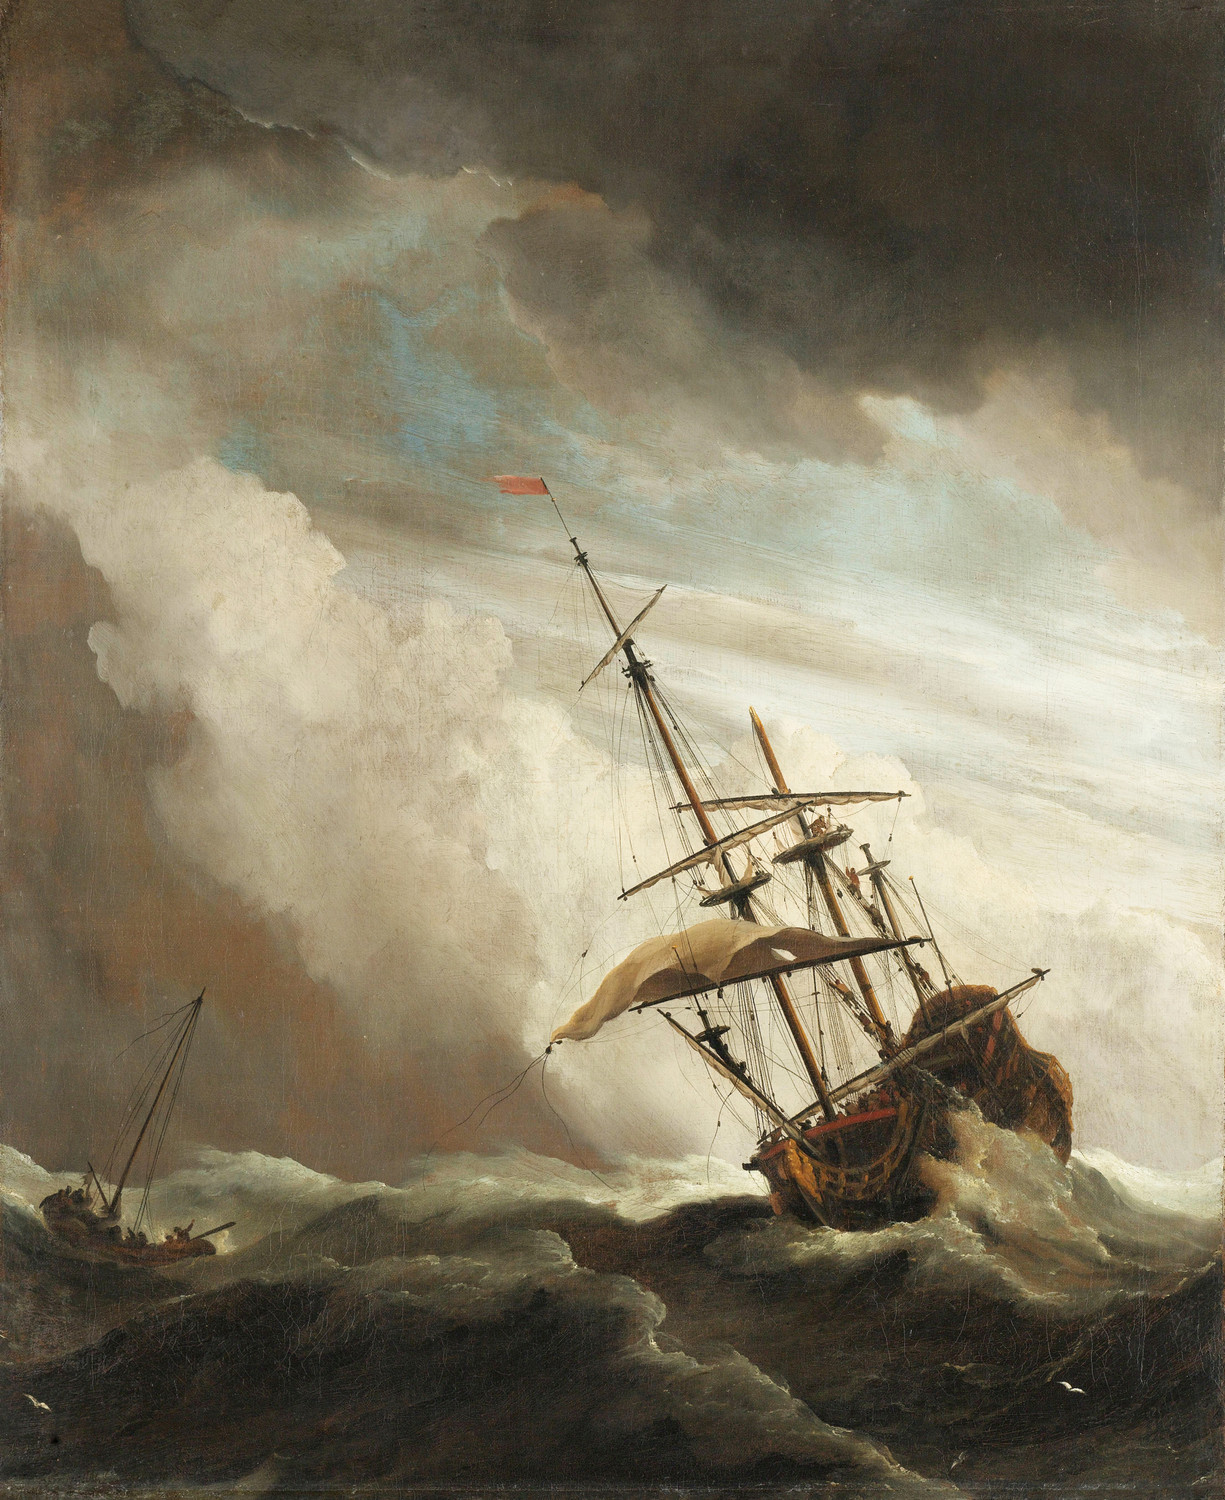 Ship　High　(II)　On　Caught　Known　The　By　X　De　Seas　31in　A　Canvas　(PRT_7918)　Squall,　Gust‚Äô　By　As　Art　‚ÄòThe　Willem　Van　Print　Velde　Canvas　25in　Art　Shop　A